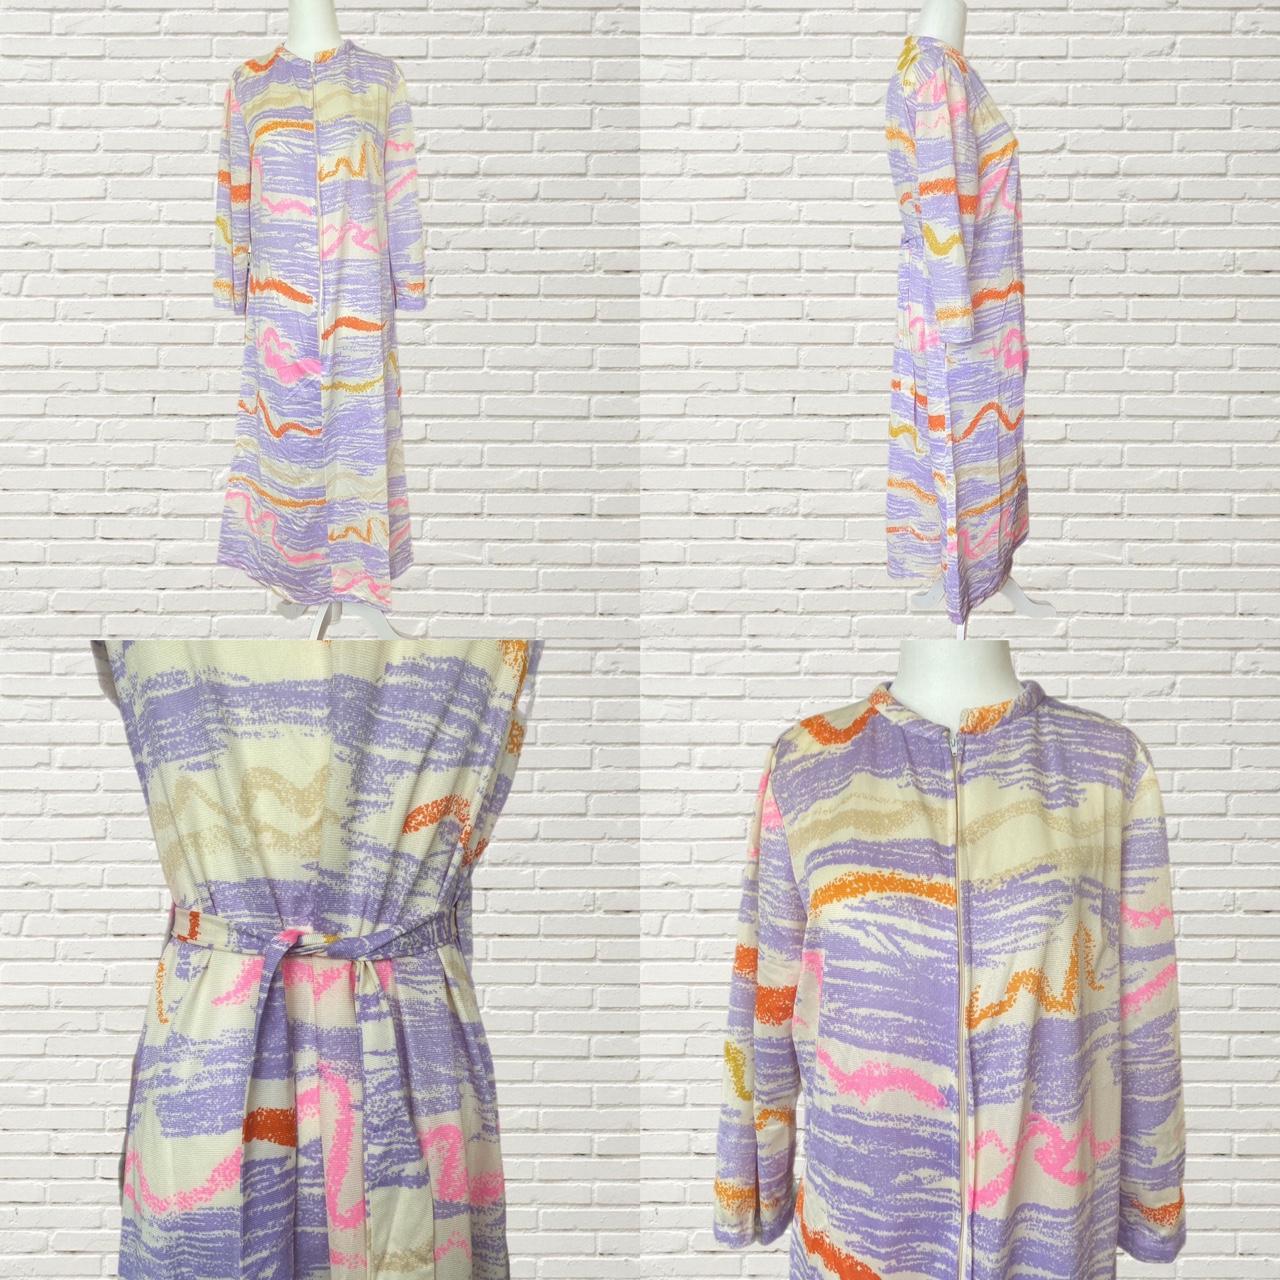 Product Image 3 - Vintage 60s 70s House Dress
funky